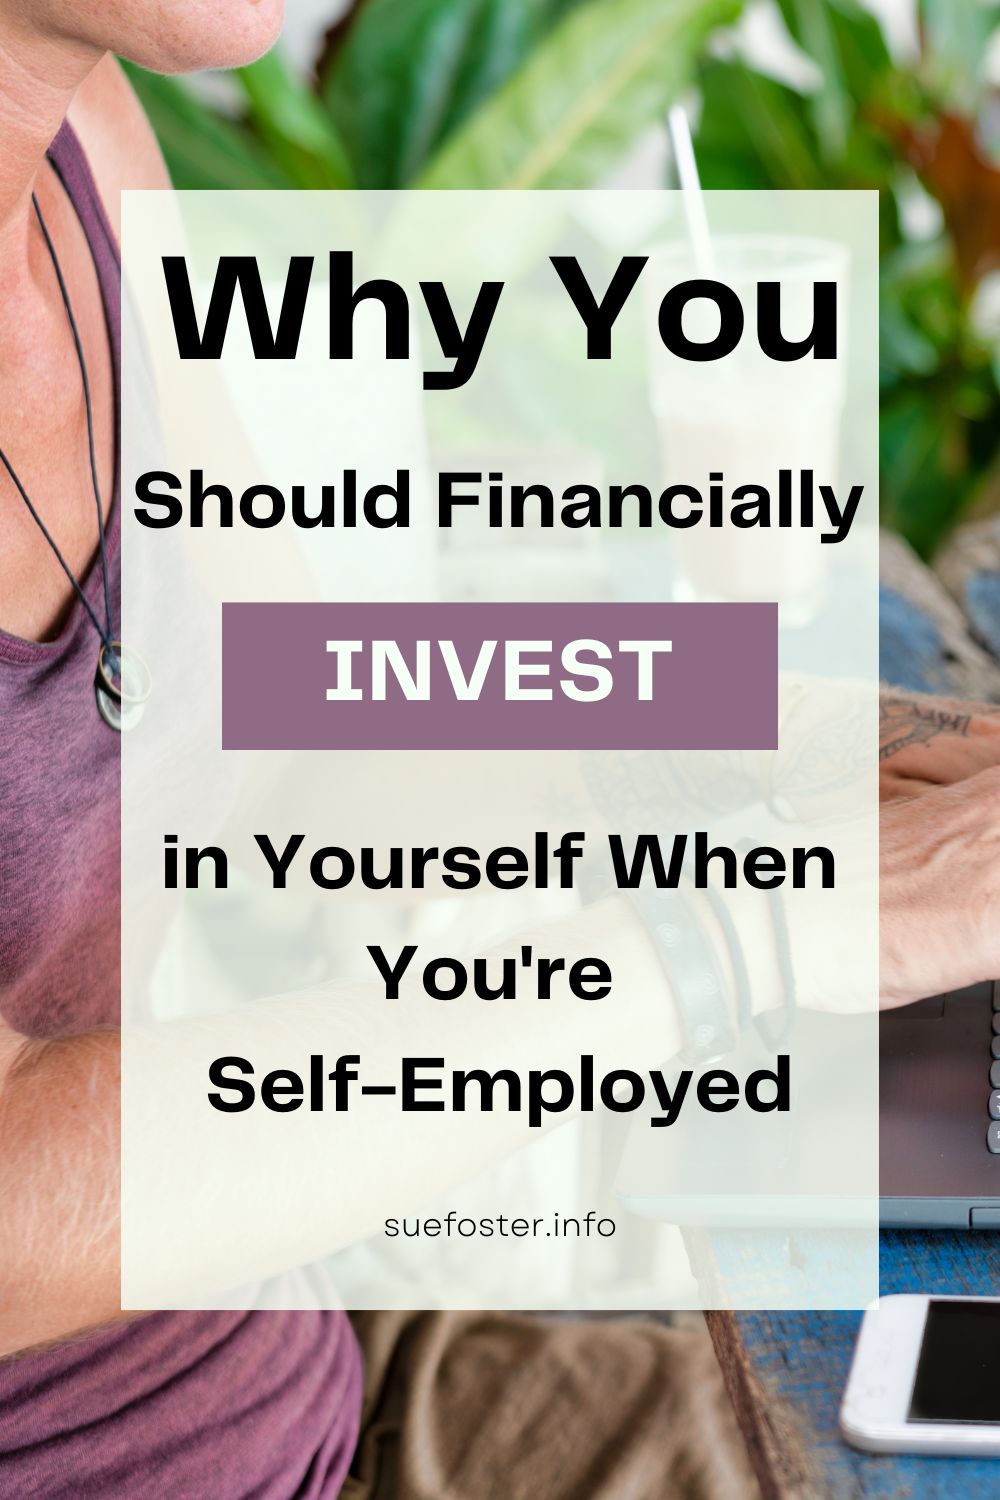 Learn why investing in yourself matters: access better resources, prevent burnout & value your worth.